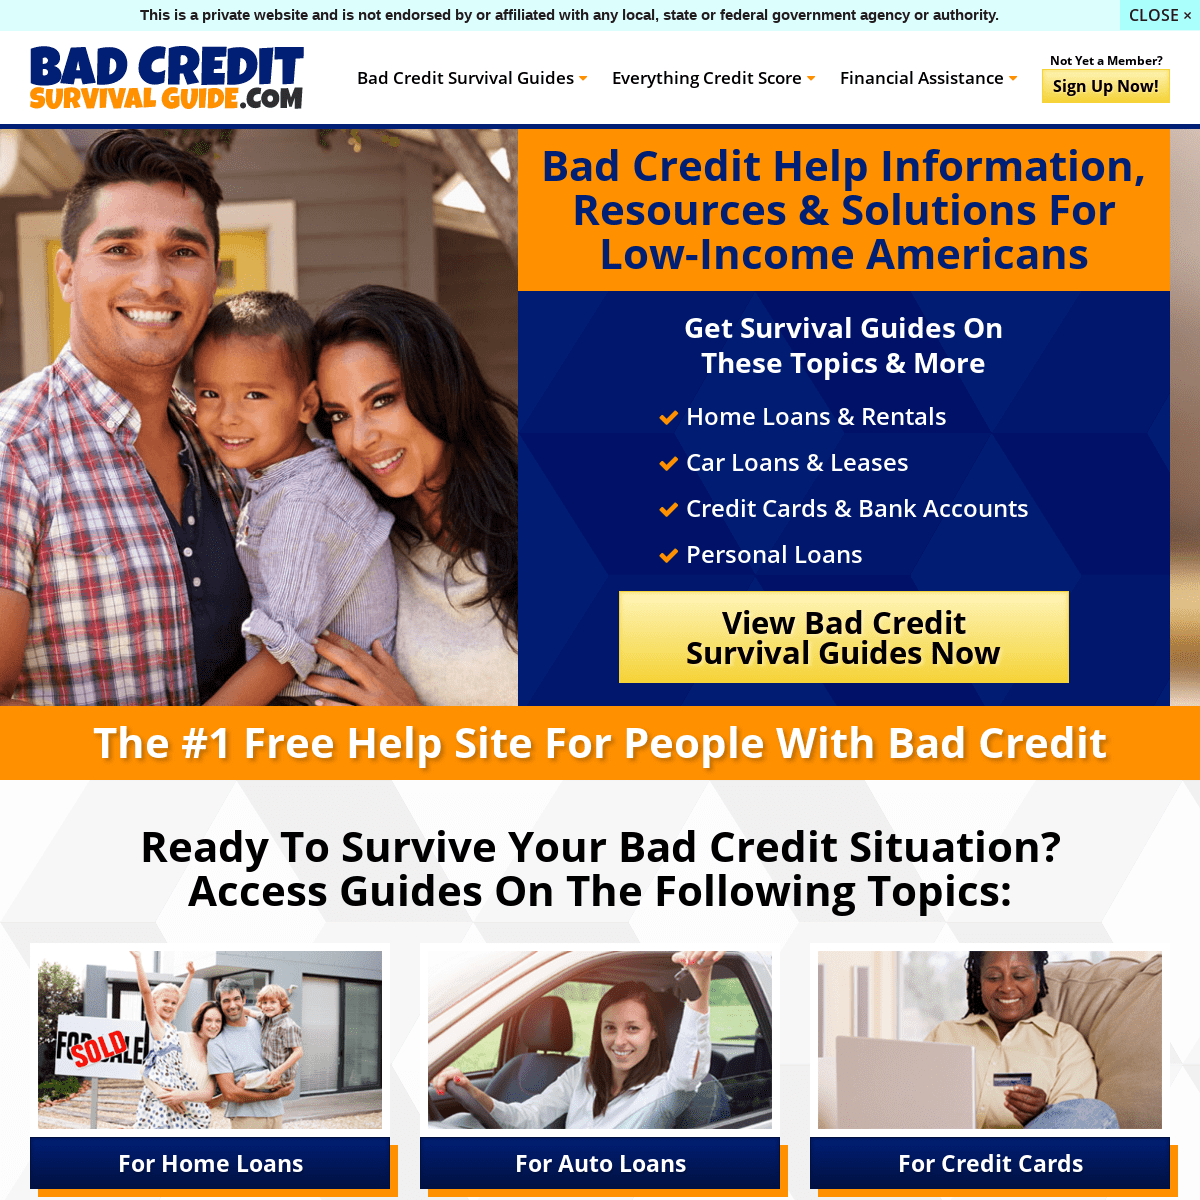 Bad Credit Survival Guide Home